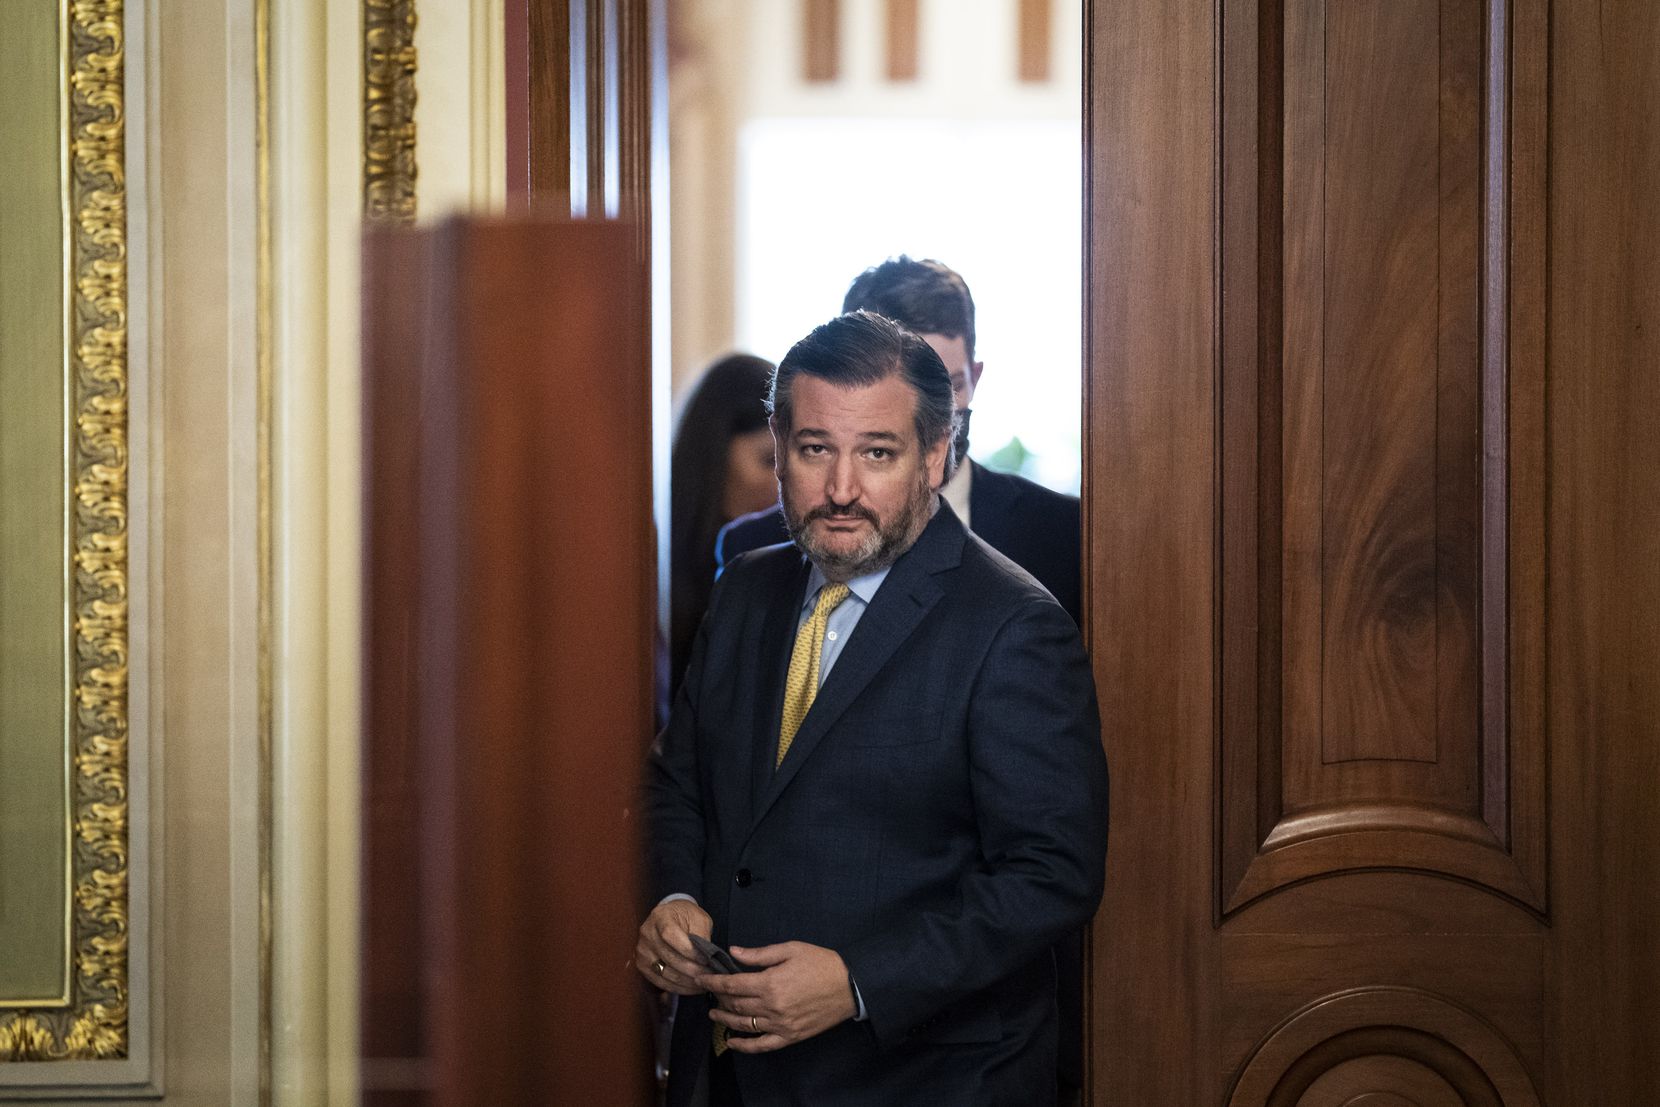 Sen. Ted Cruz, R-Texas, walks out of a meeting room for Donald Trump's lawyers and back to the Senate floor through the Senate Reception room on the fourth day of Trump's impeachment trial, Feb 12, 2021.